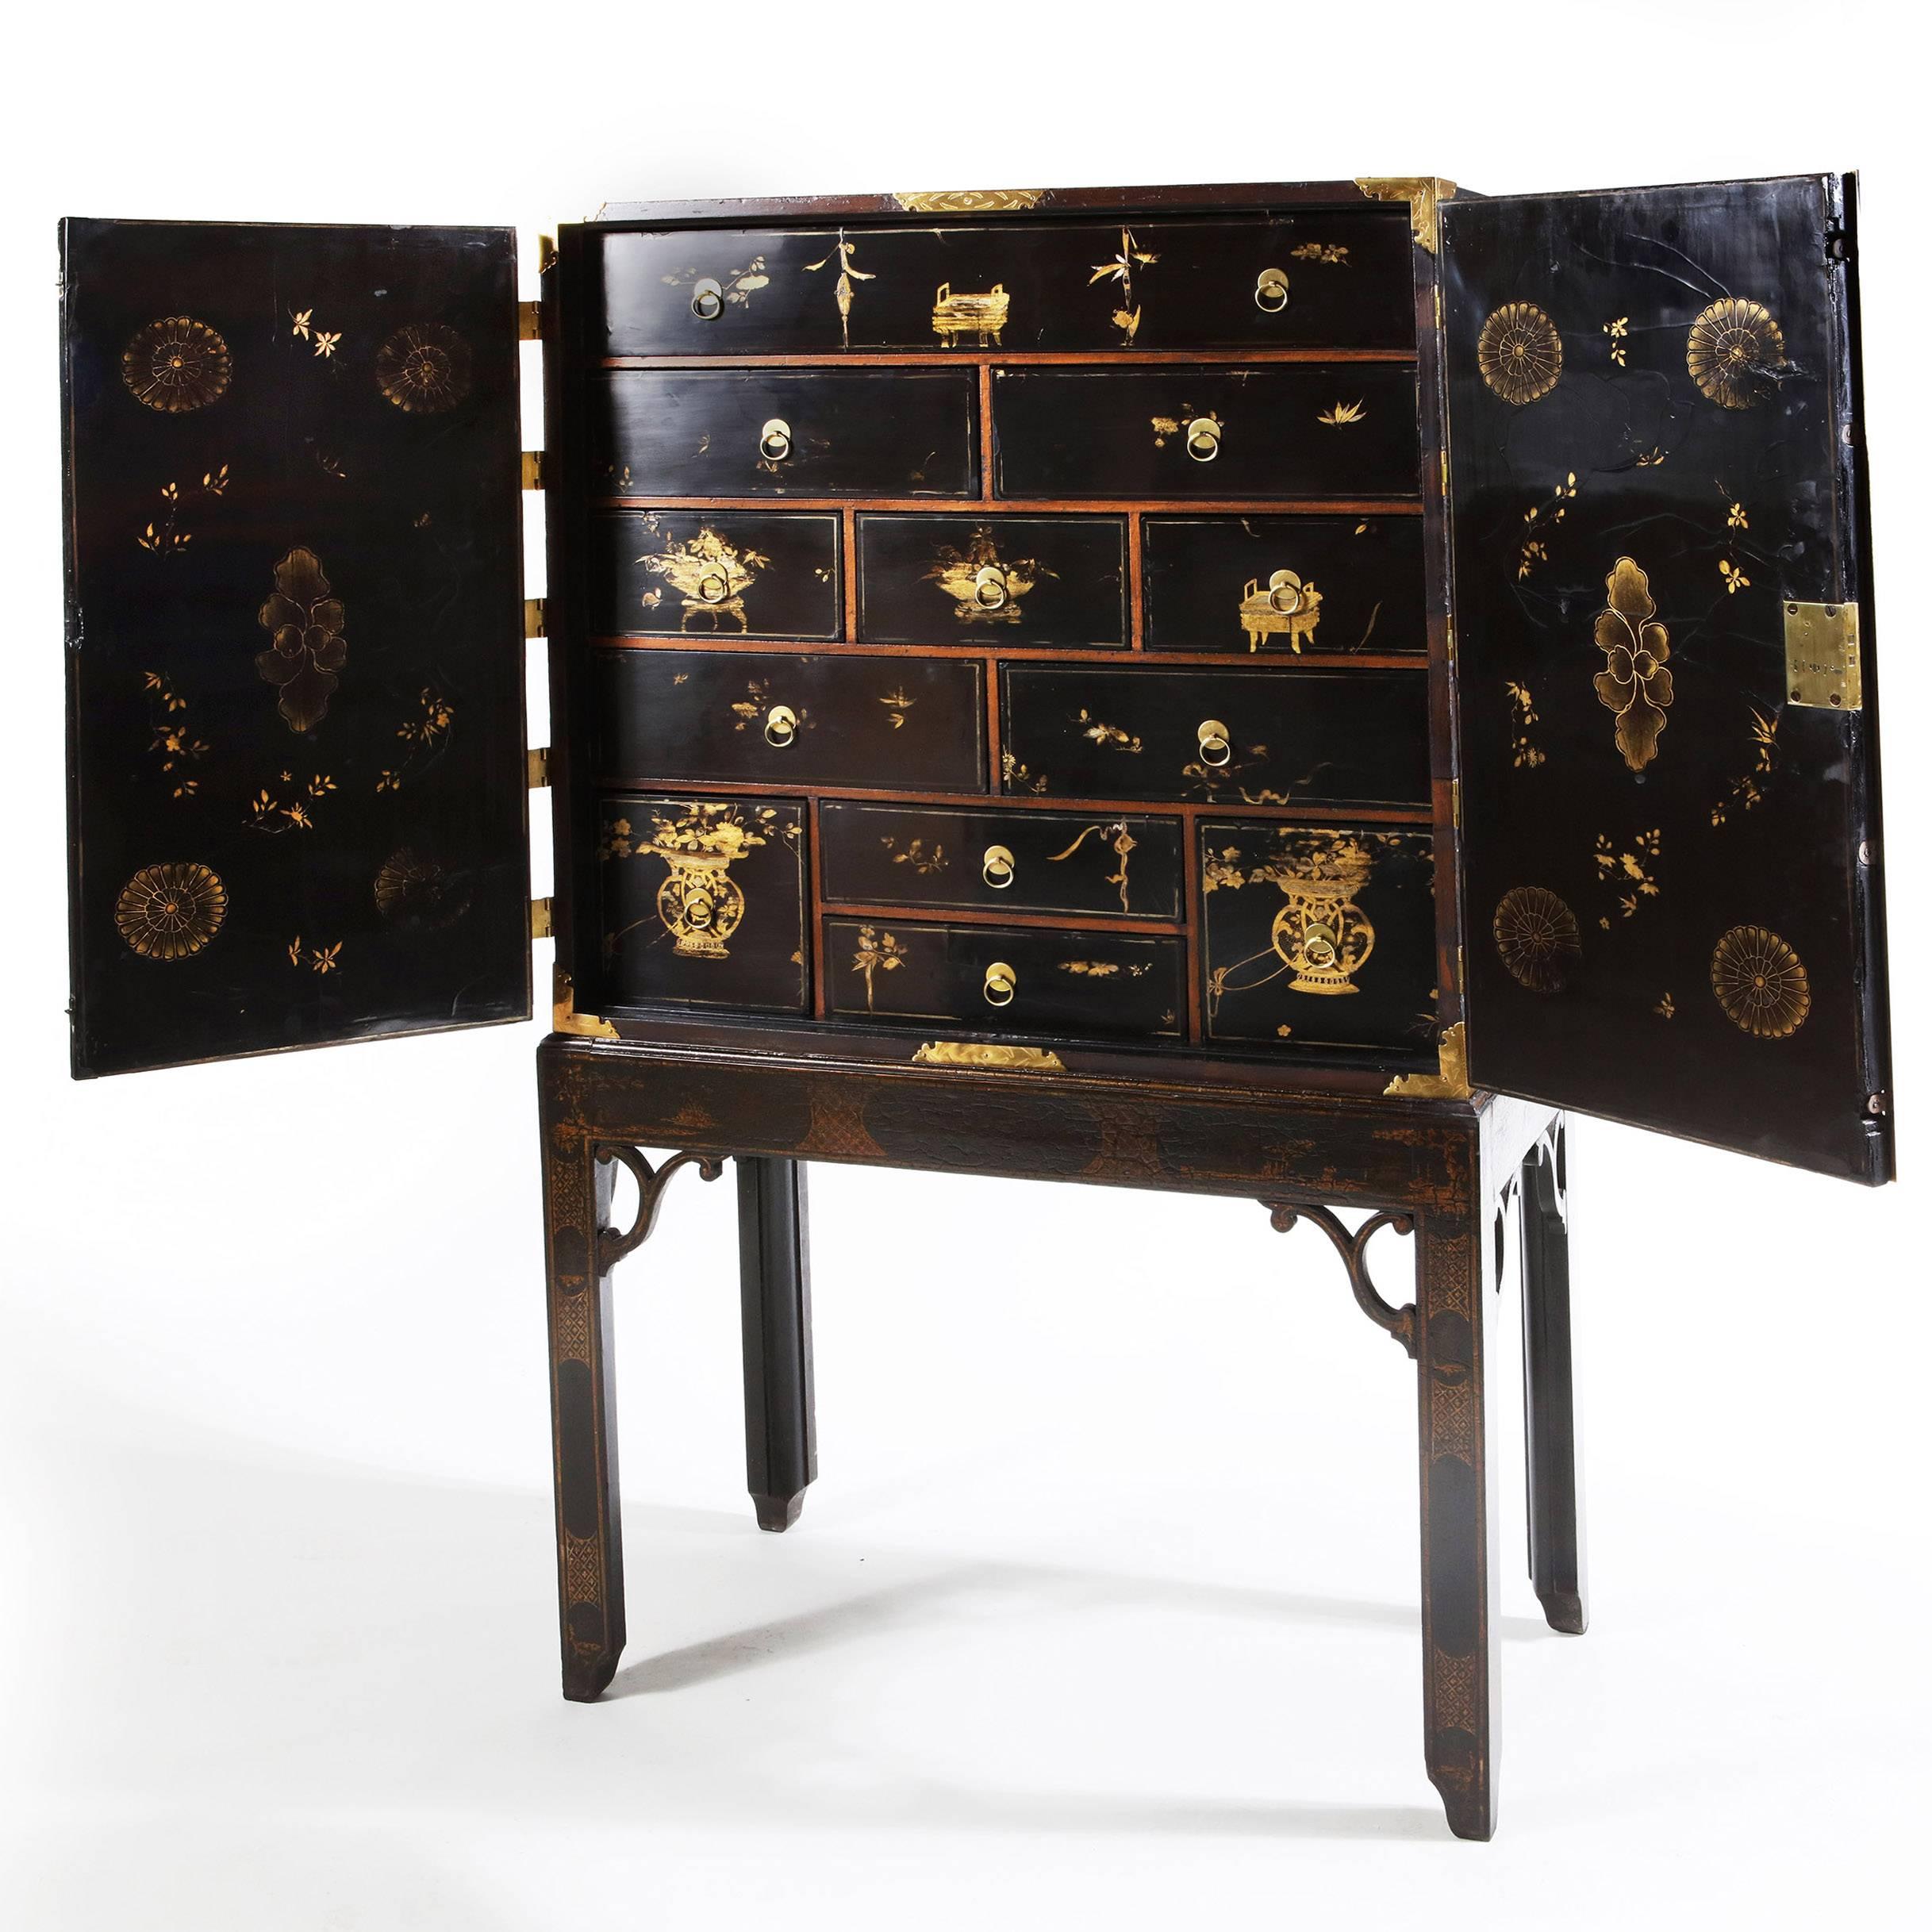 George III Black Japanned Lacquer Cabinet on Stand In Excellent Condition For Sale In London, by appointment only